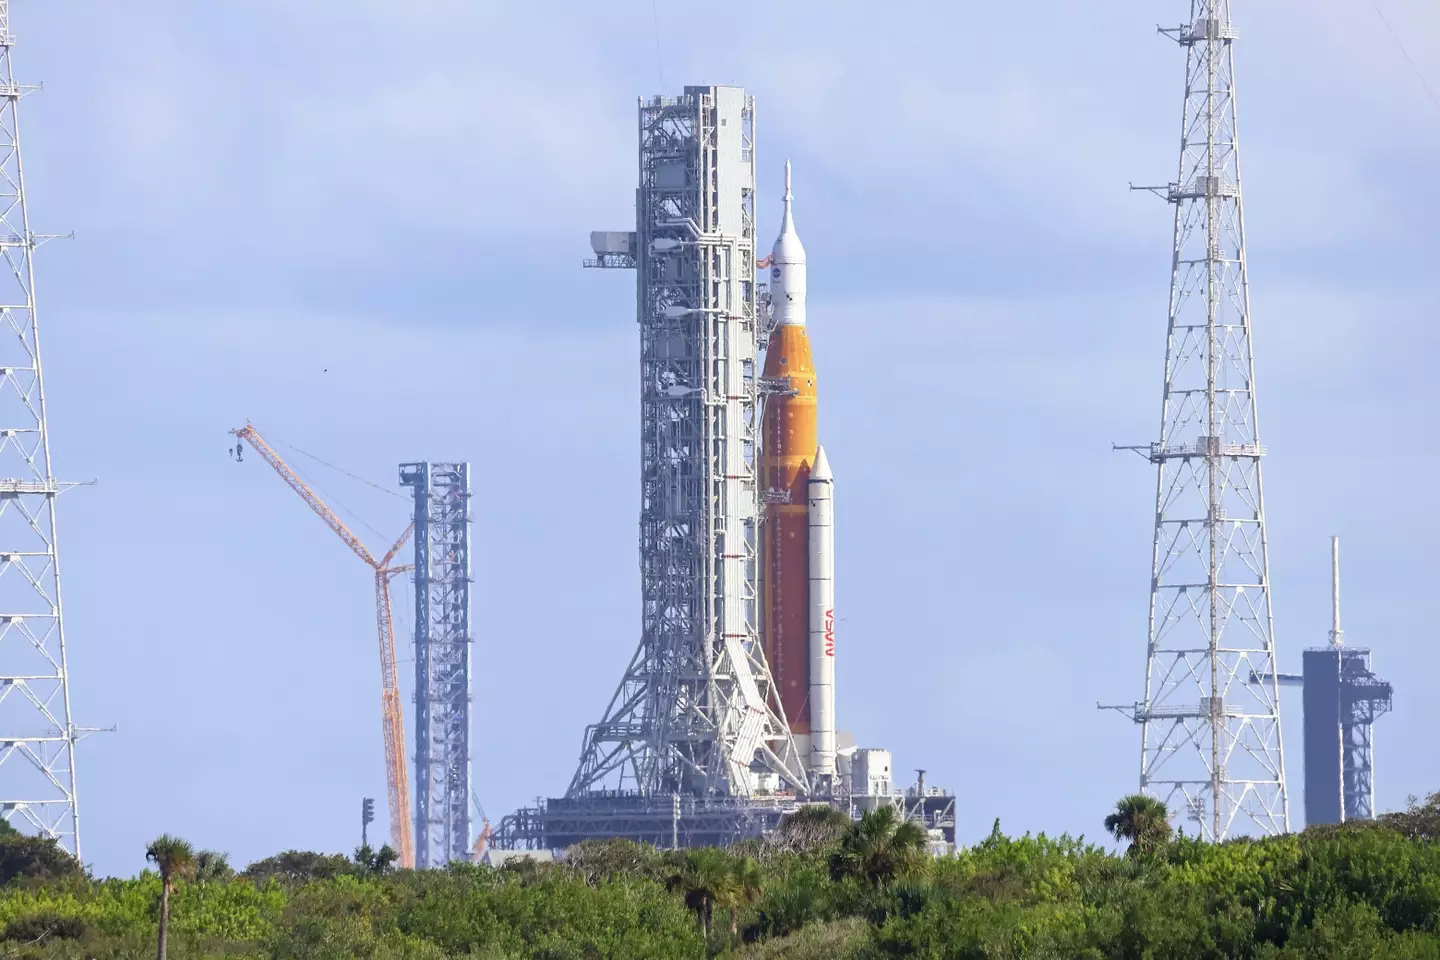 NASA’s brand new, yet-to-fly, Space Launch System (SLS) rocket, pictured, will fly to the Moon this week..